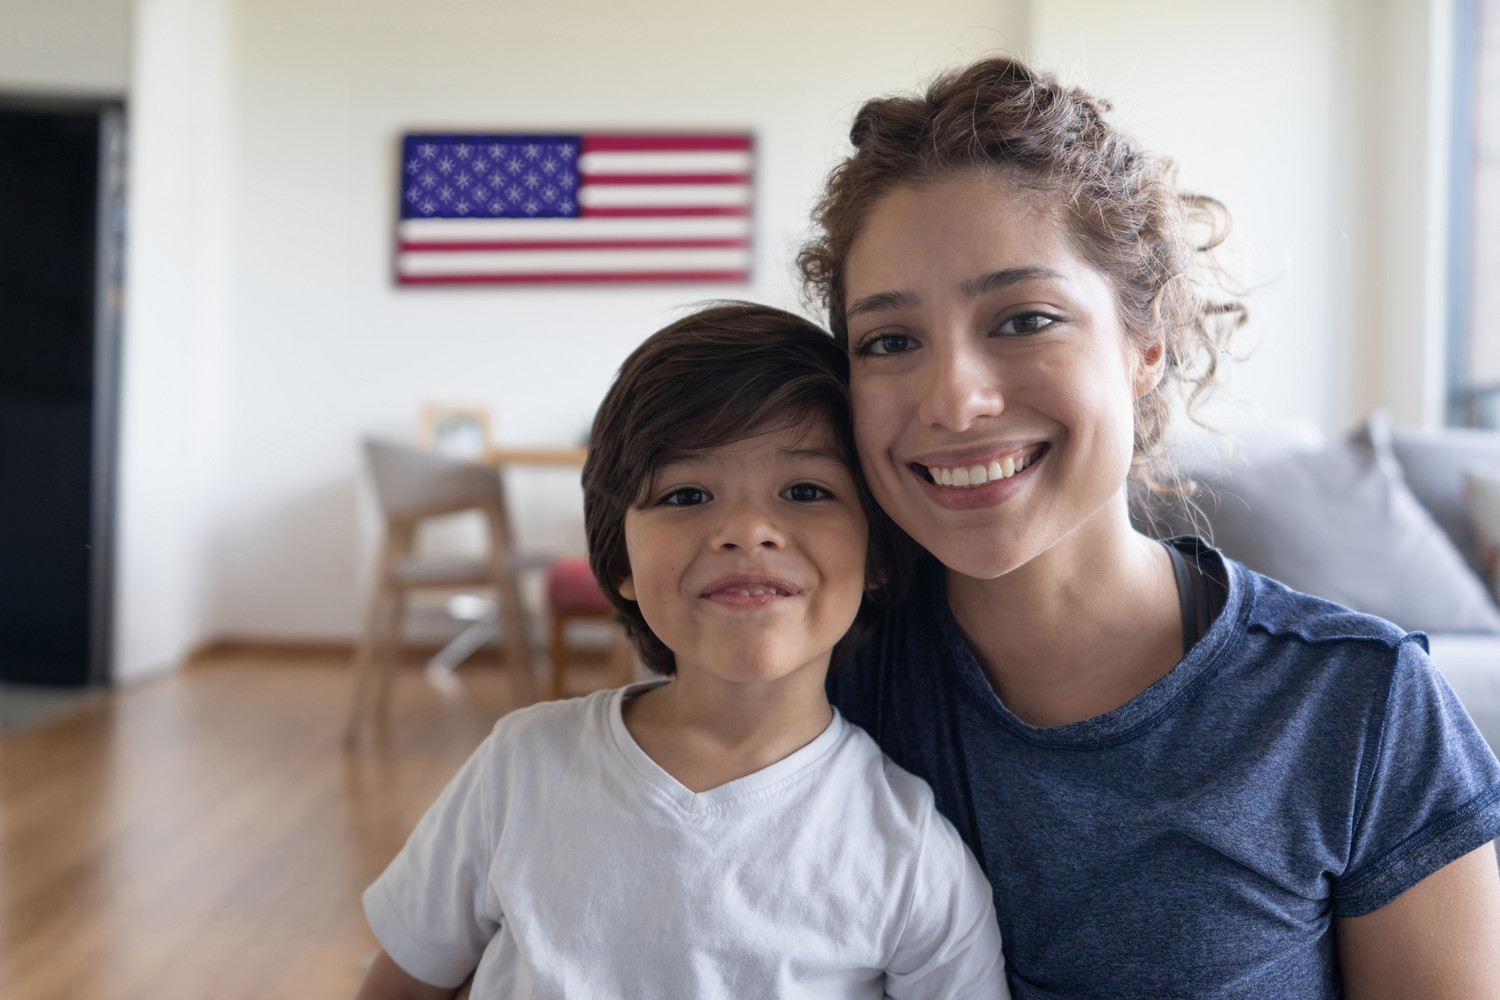 mother and child smiling with flag in background